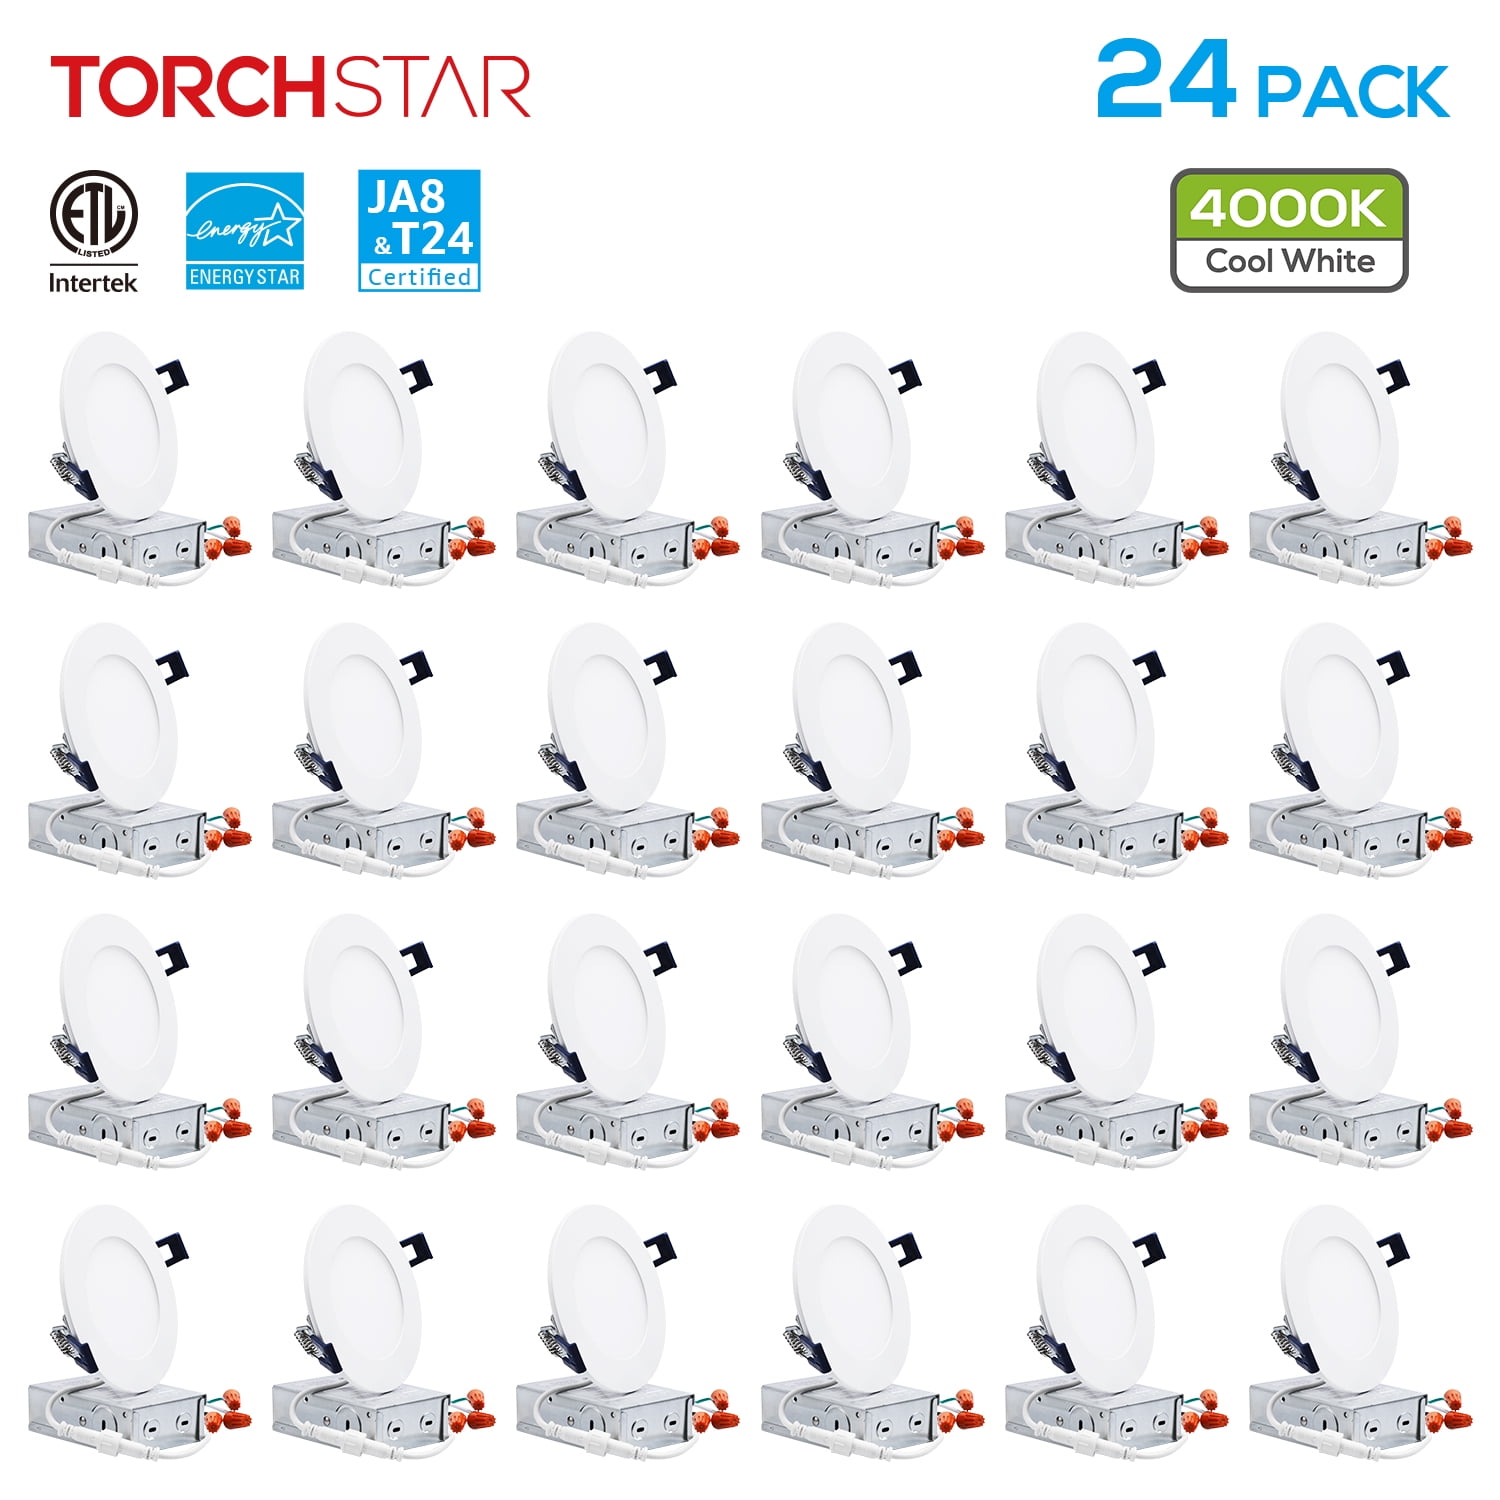 TORCHSTAR 24-Pack Inch Slim LED Recessed Downlight with J-box, 10.5W  Dimmable Ultra-Thin Canless Light, ETL  Energy Star Listed, 800lm, 4000K  Cool White, 5-Year Warranty, White